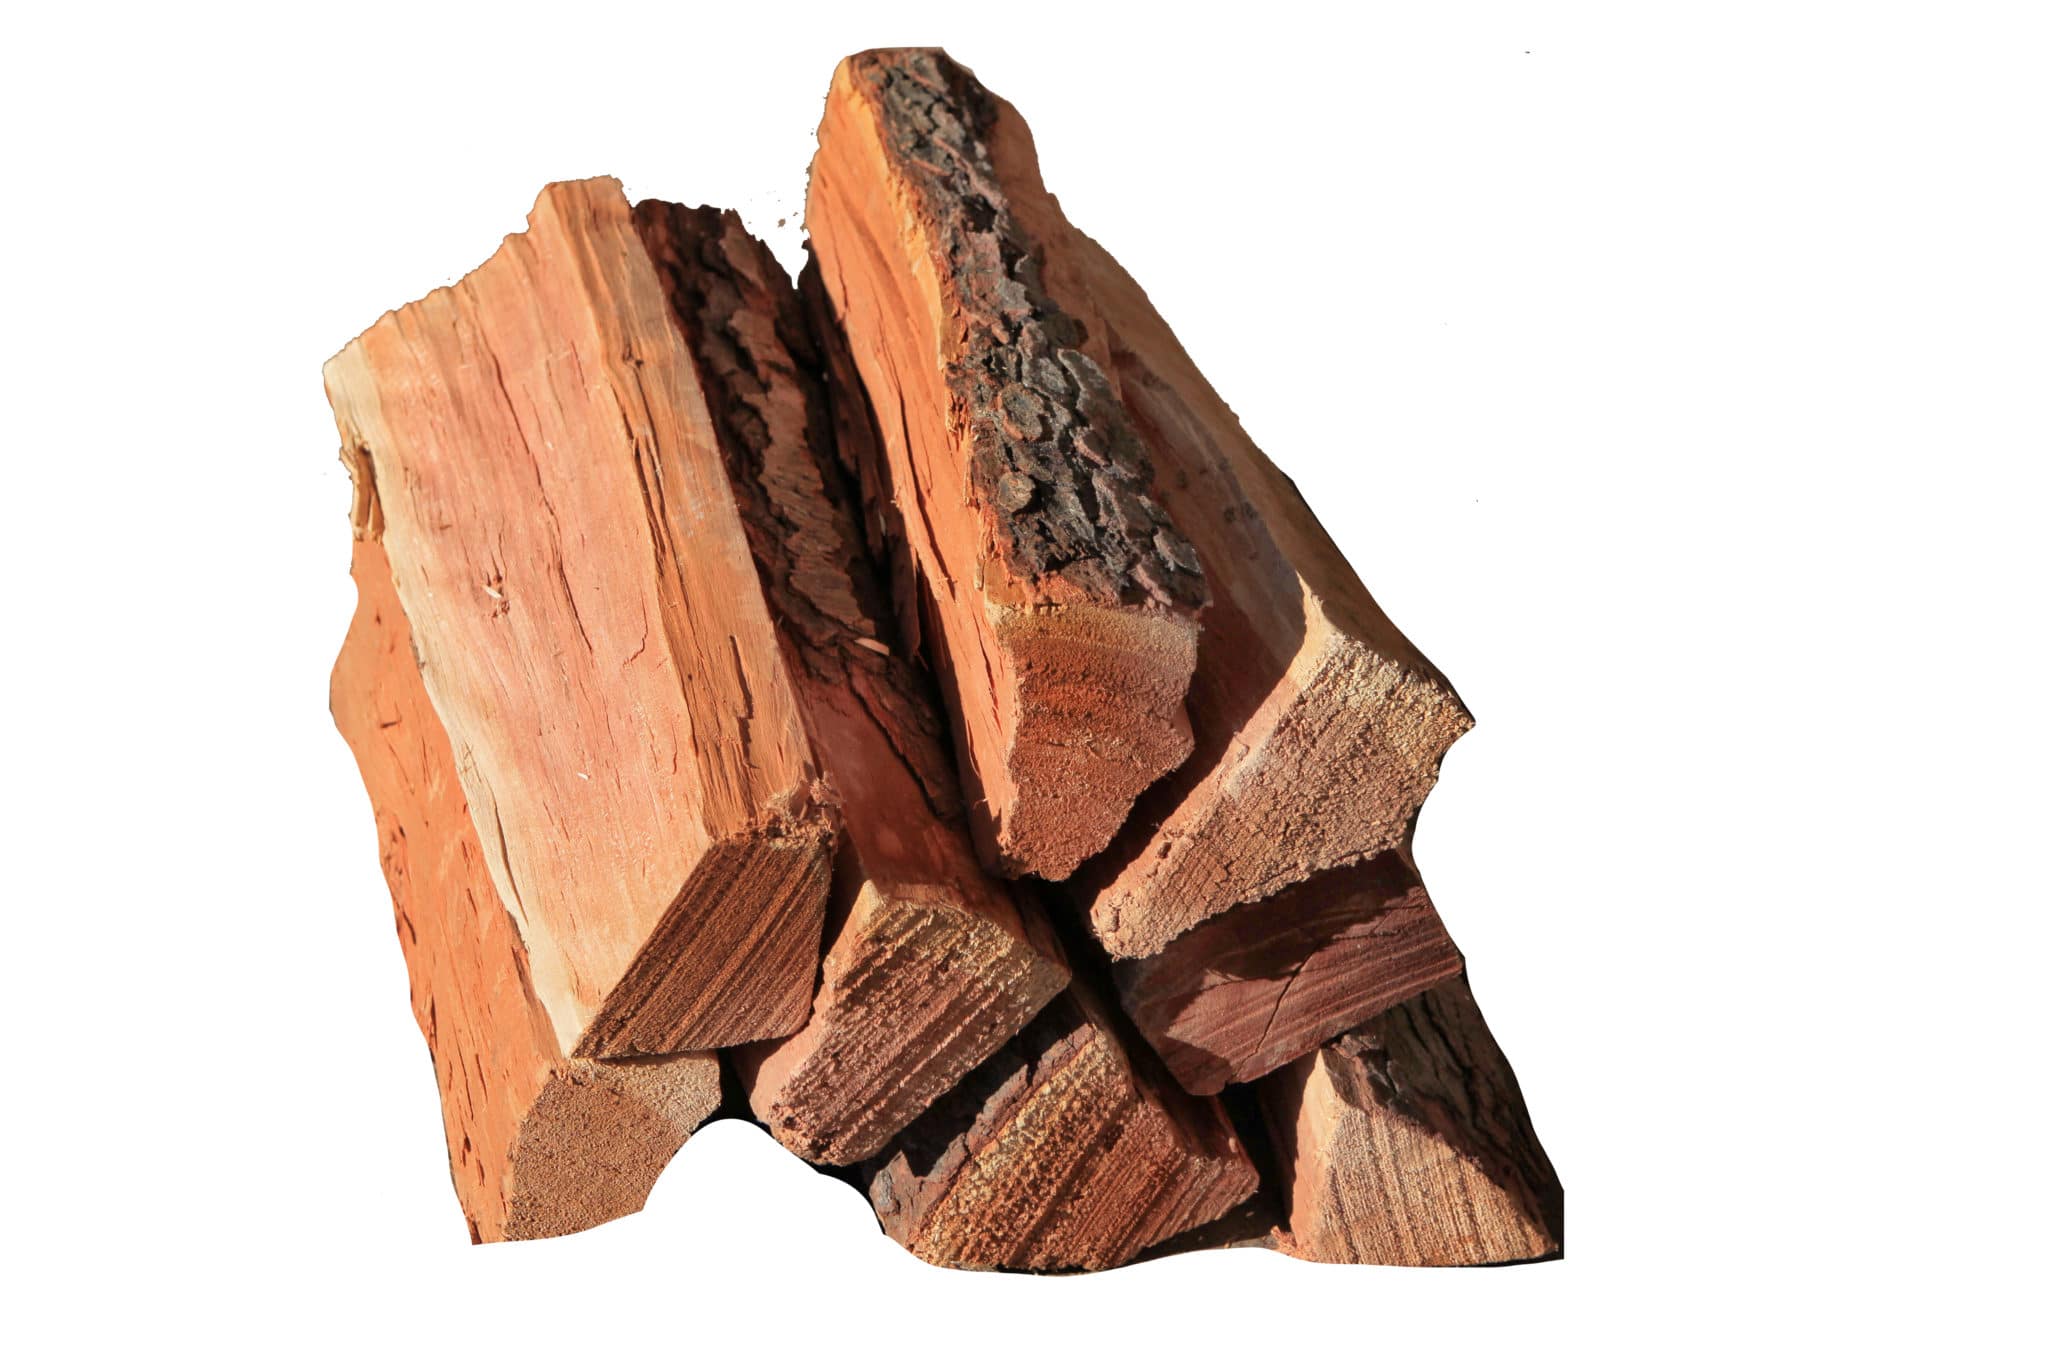 Premier Firewood Company™ Firewood For Sale And Delivery In Ct And Ny